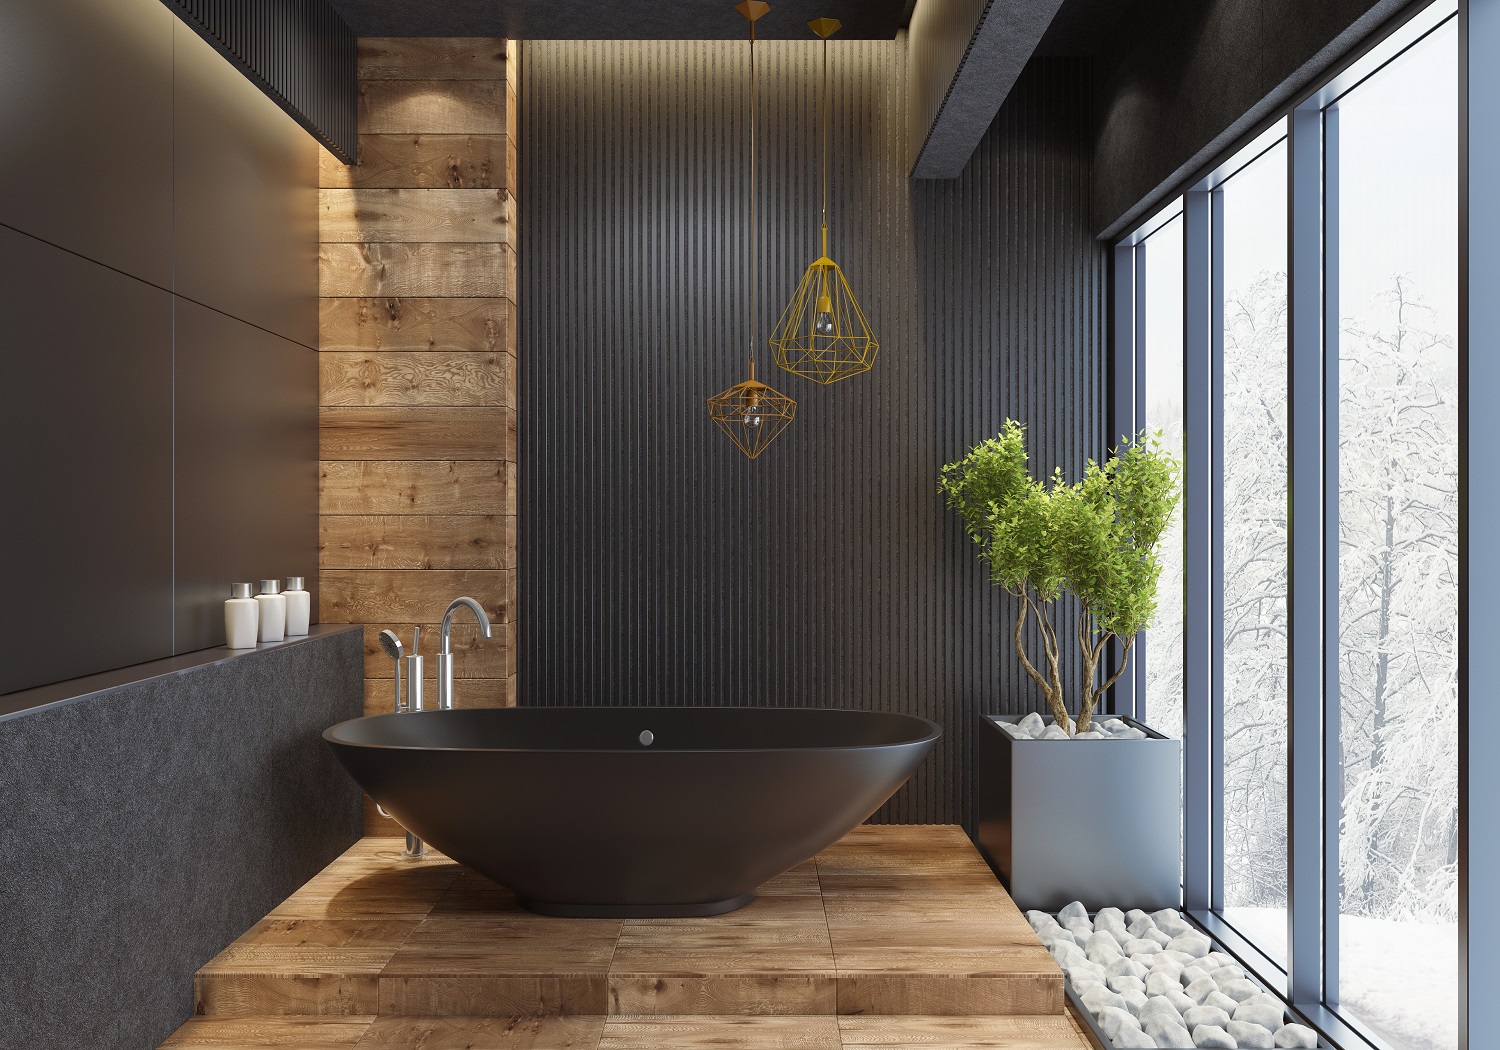 https://www.sanctuary-bathrooms.co.uk/storage/app/media/Blog%20Posts/Black%20and%20White%20Bathrooms/black%20freestanding%20bath%20with%20wooden%20touches%20and%20plant.jpg